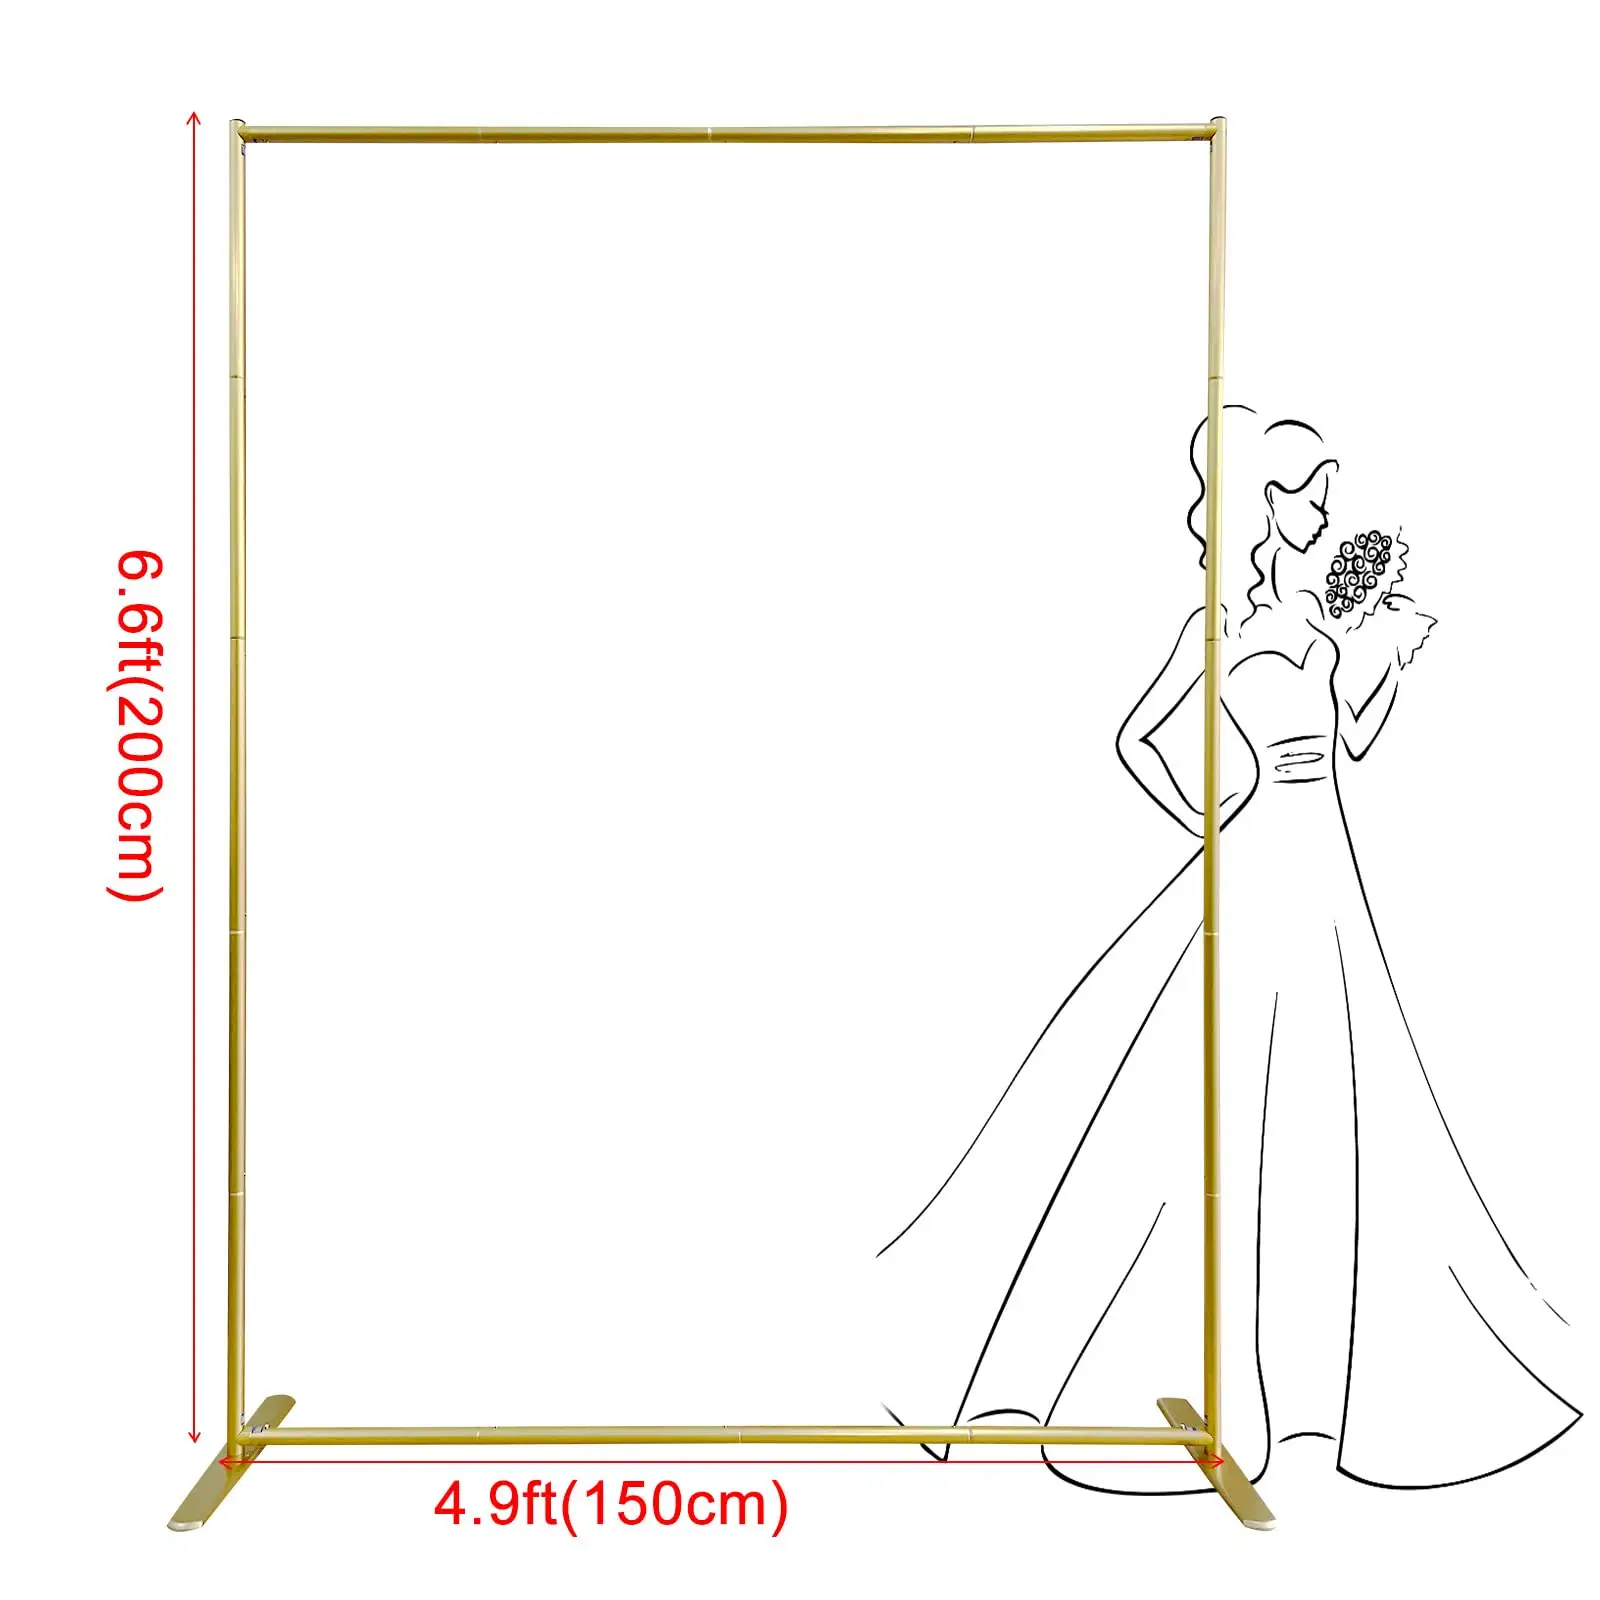 Wholesale 6.6 x 5 ft Adjustable Gold Square Aluminum Balloon Wedding Flowers Metal Backdrop Frame Stand for Wedding Party